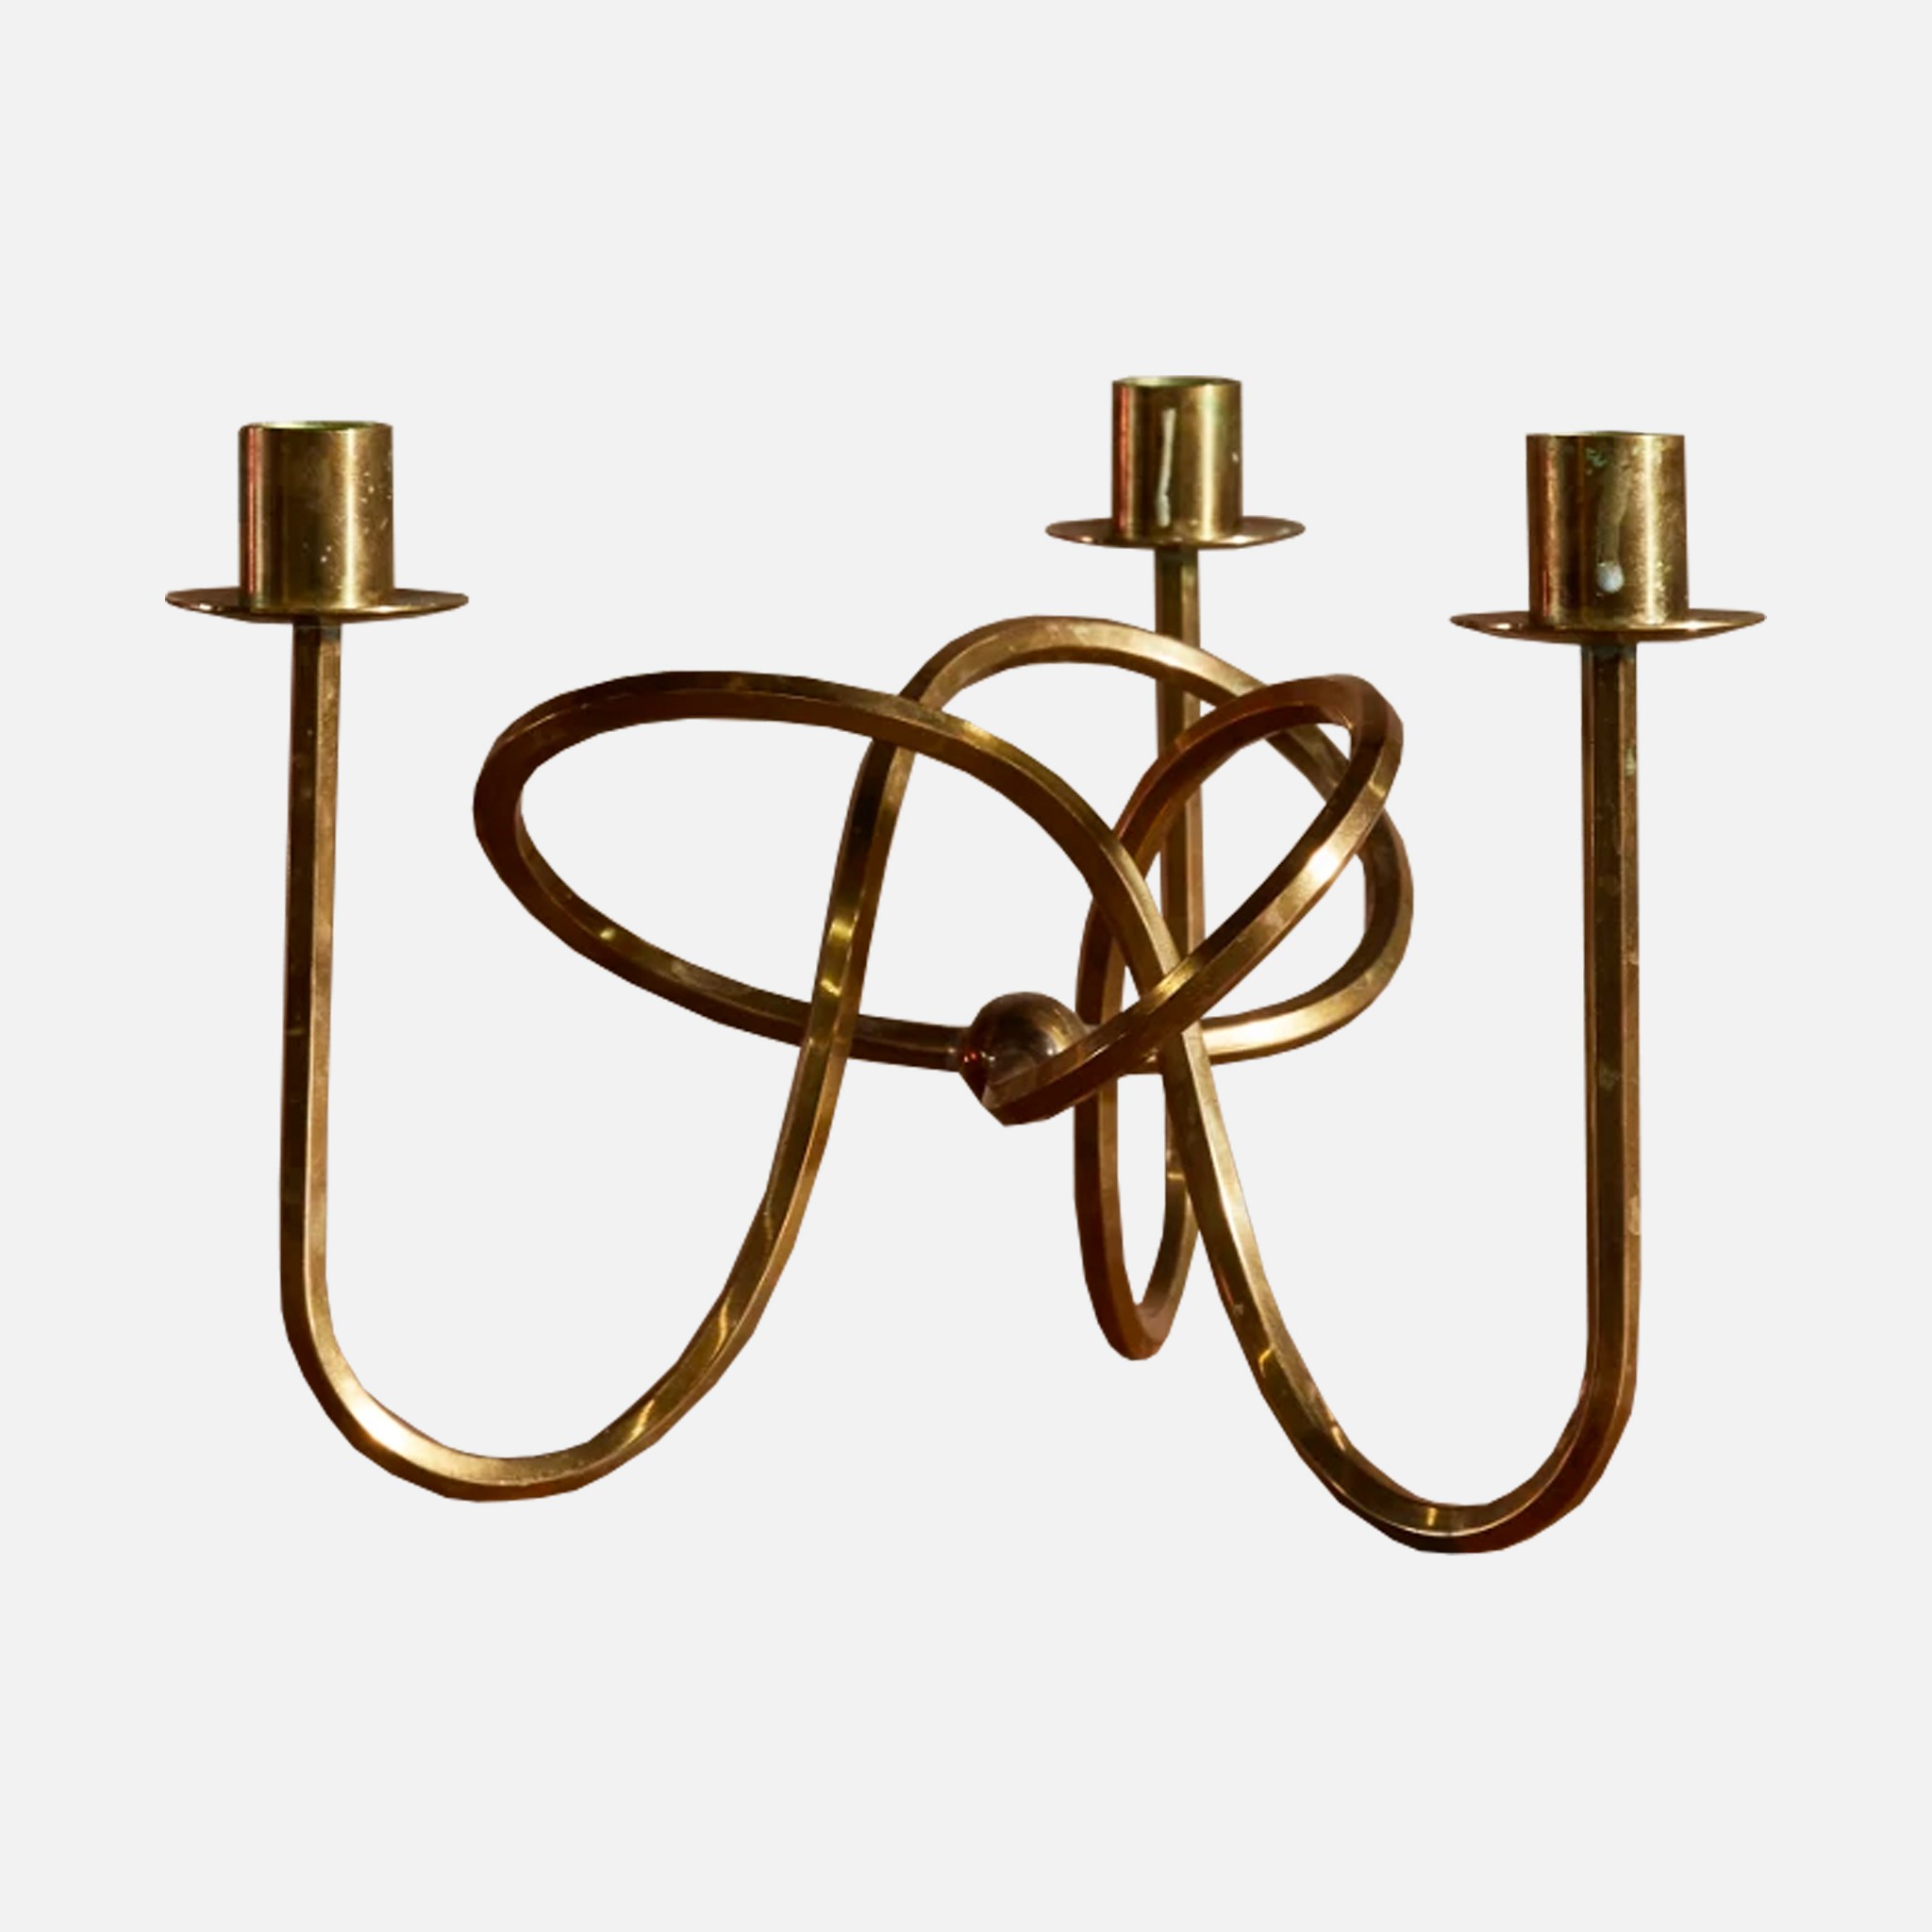 The image of an Josef Frank Friendship Knot Brass Candlestick product